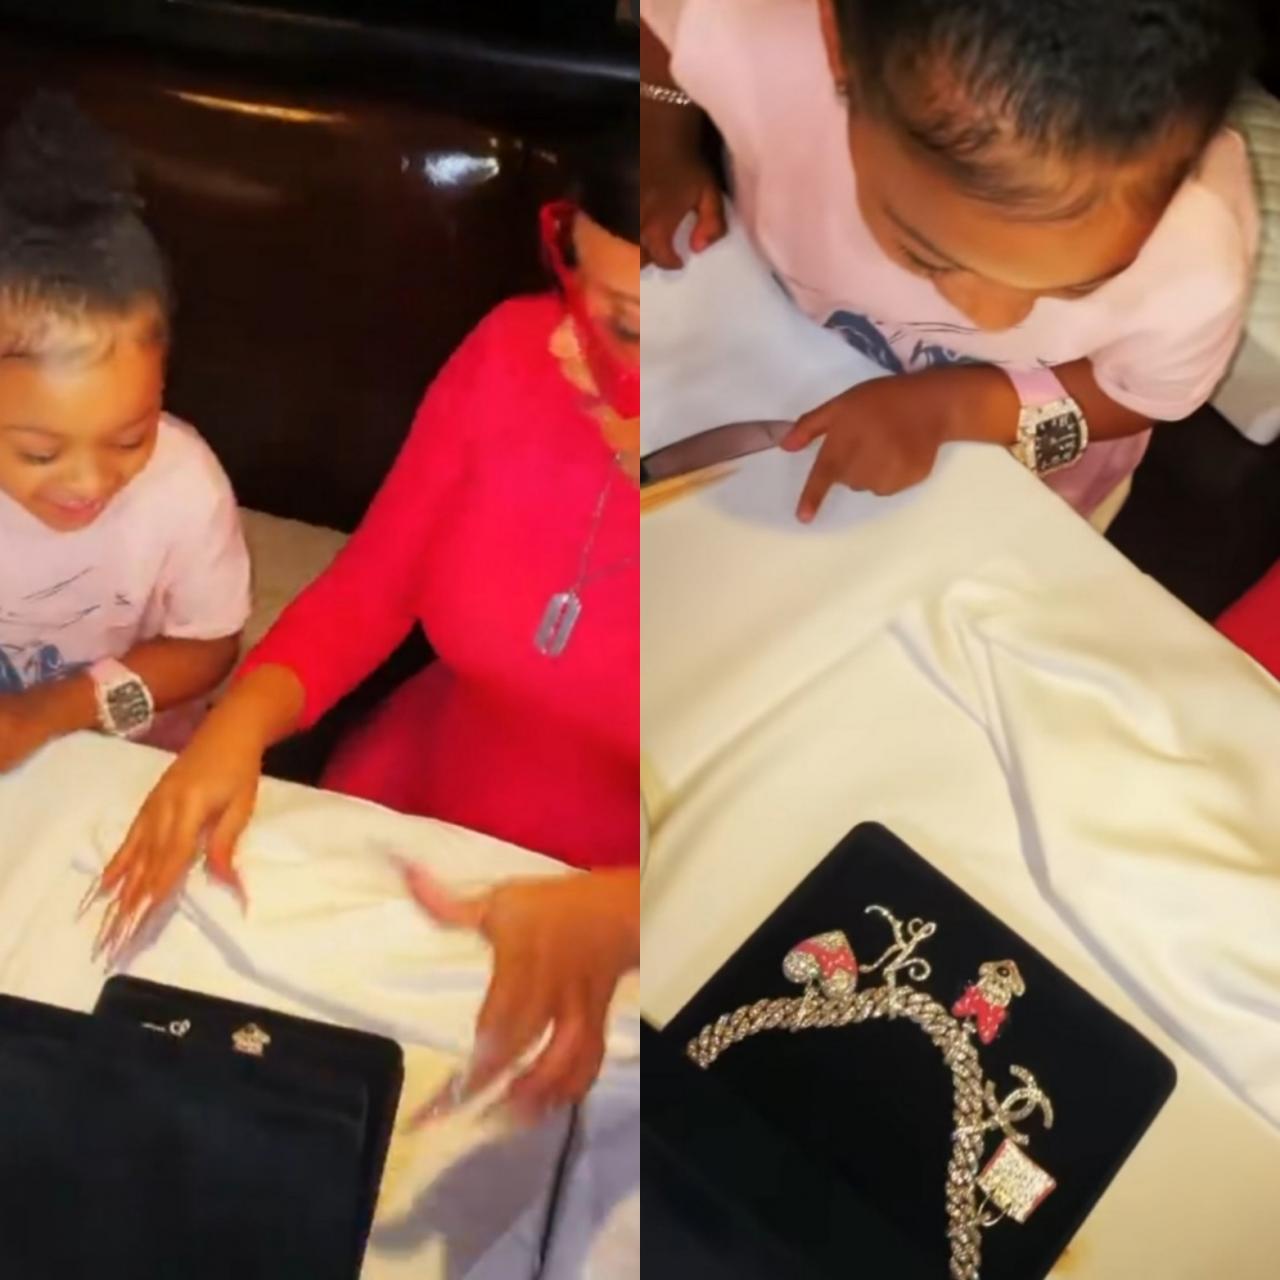 Cardi B gifts daughter, Kulture, a blinged-out charm necklace for her 3rd birthday after Offset gave the child a $250,000 Richard Mille watch (video)